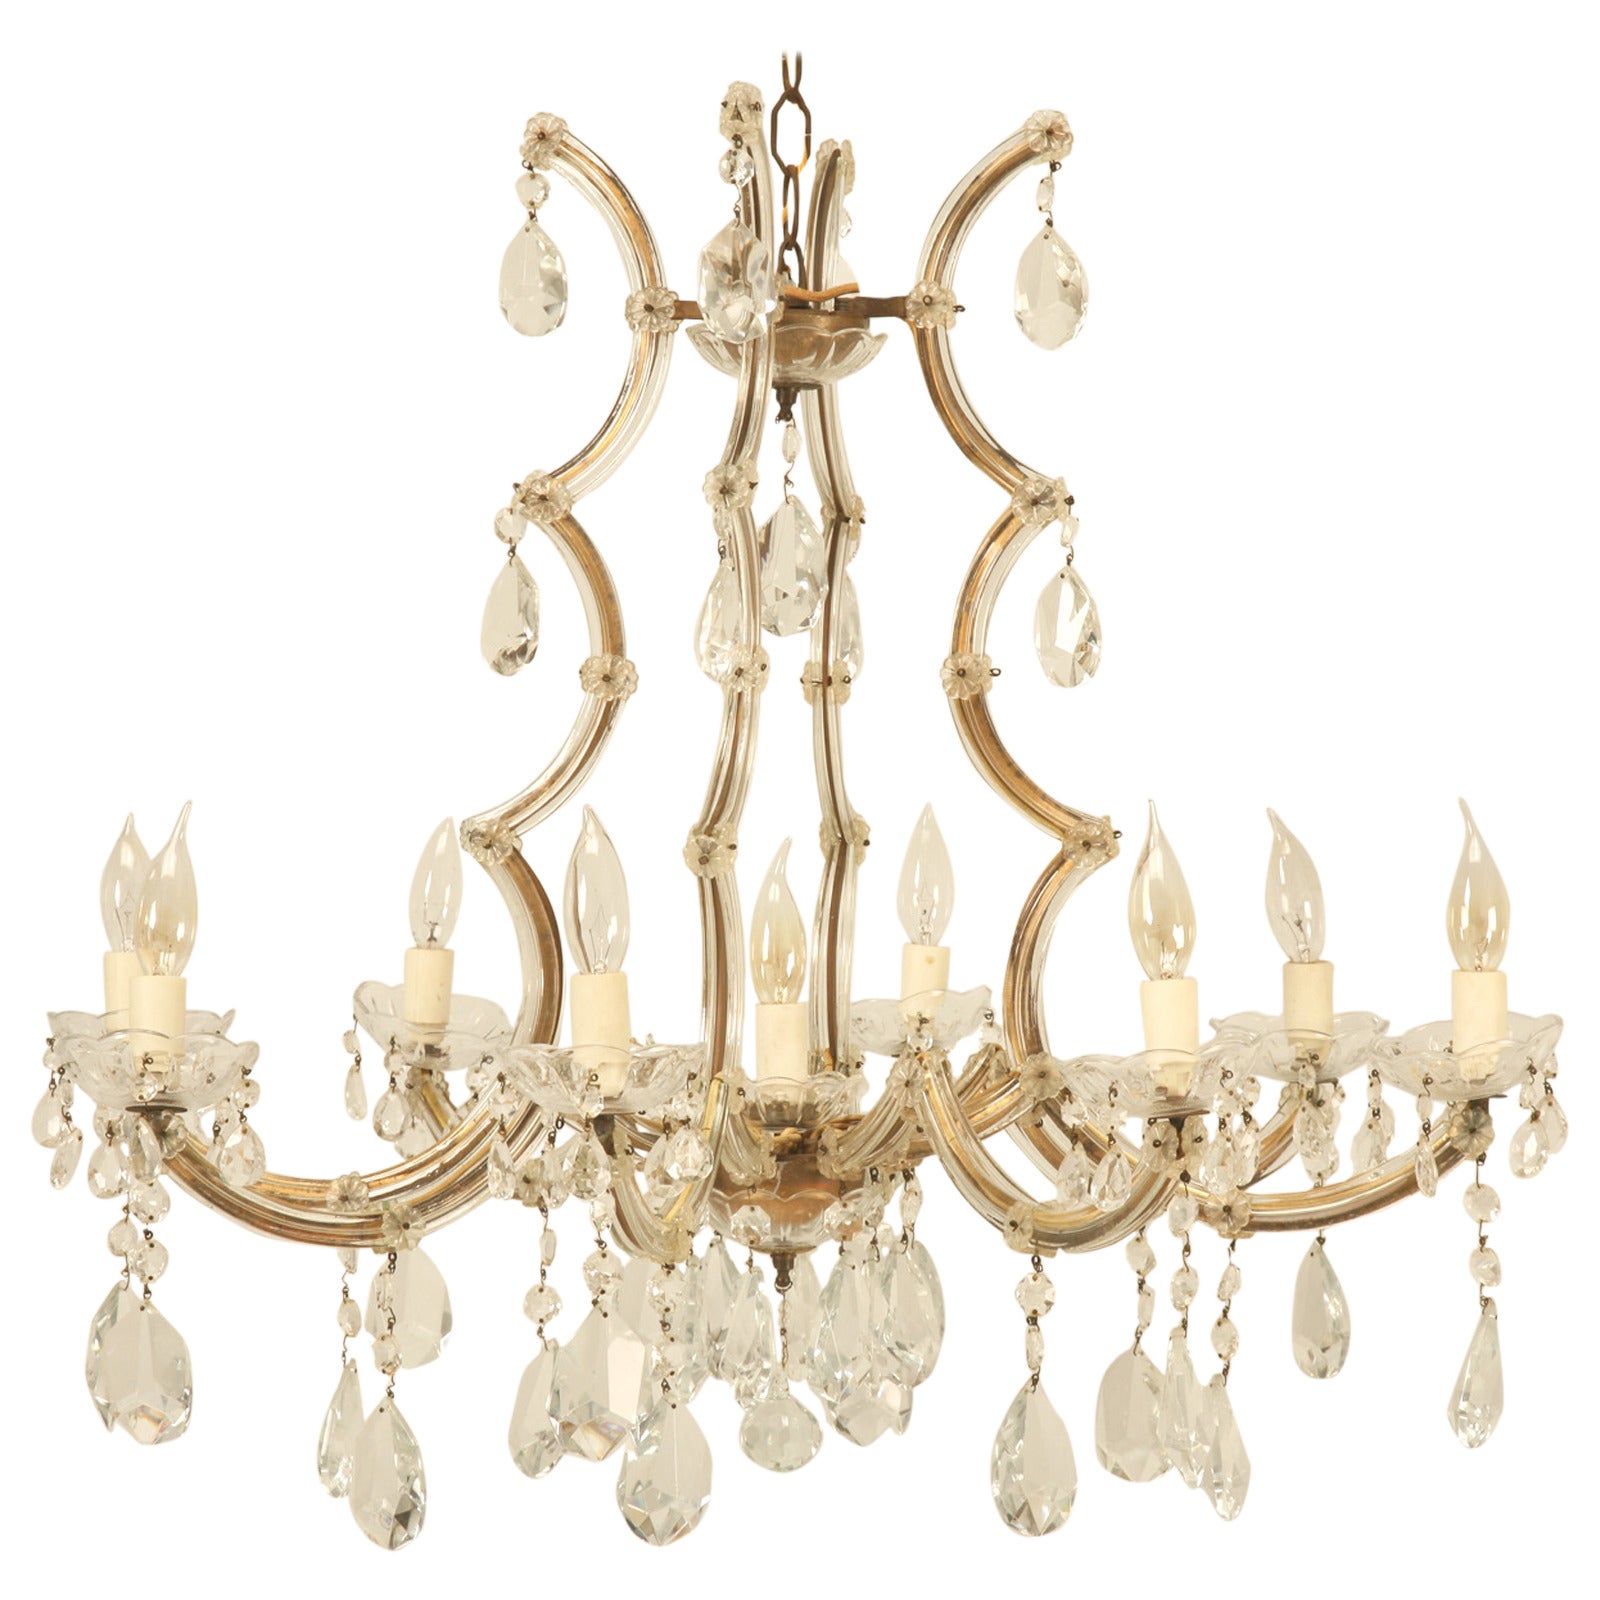 Spanish Chandelier in a Baroque Style, Brass and Crystal circa 1930s